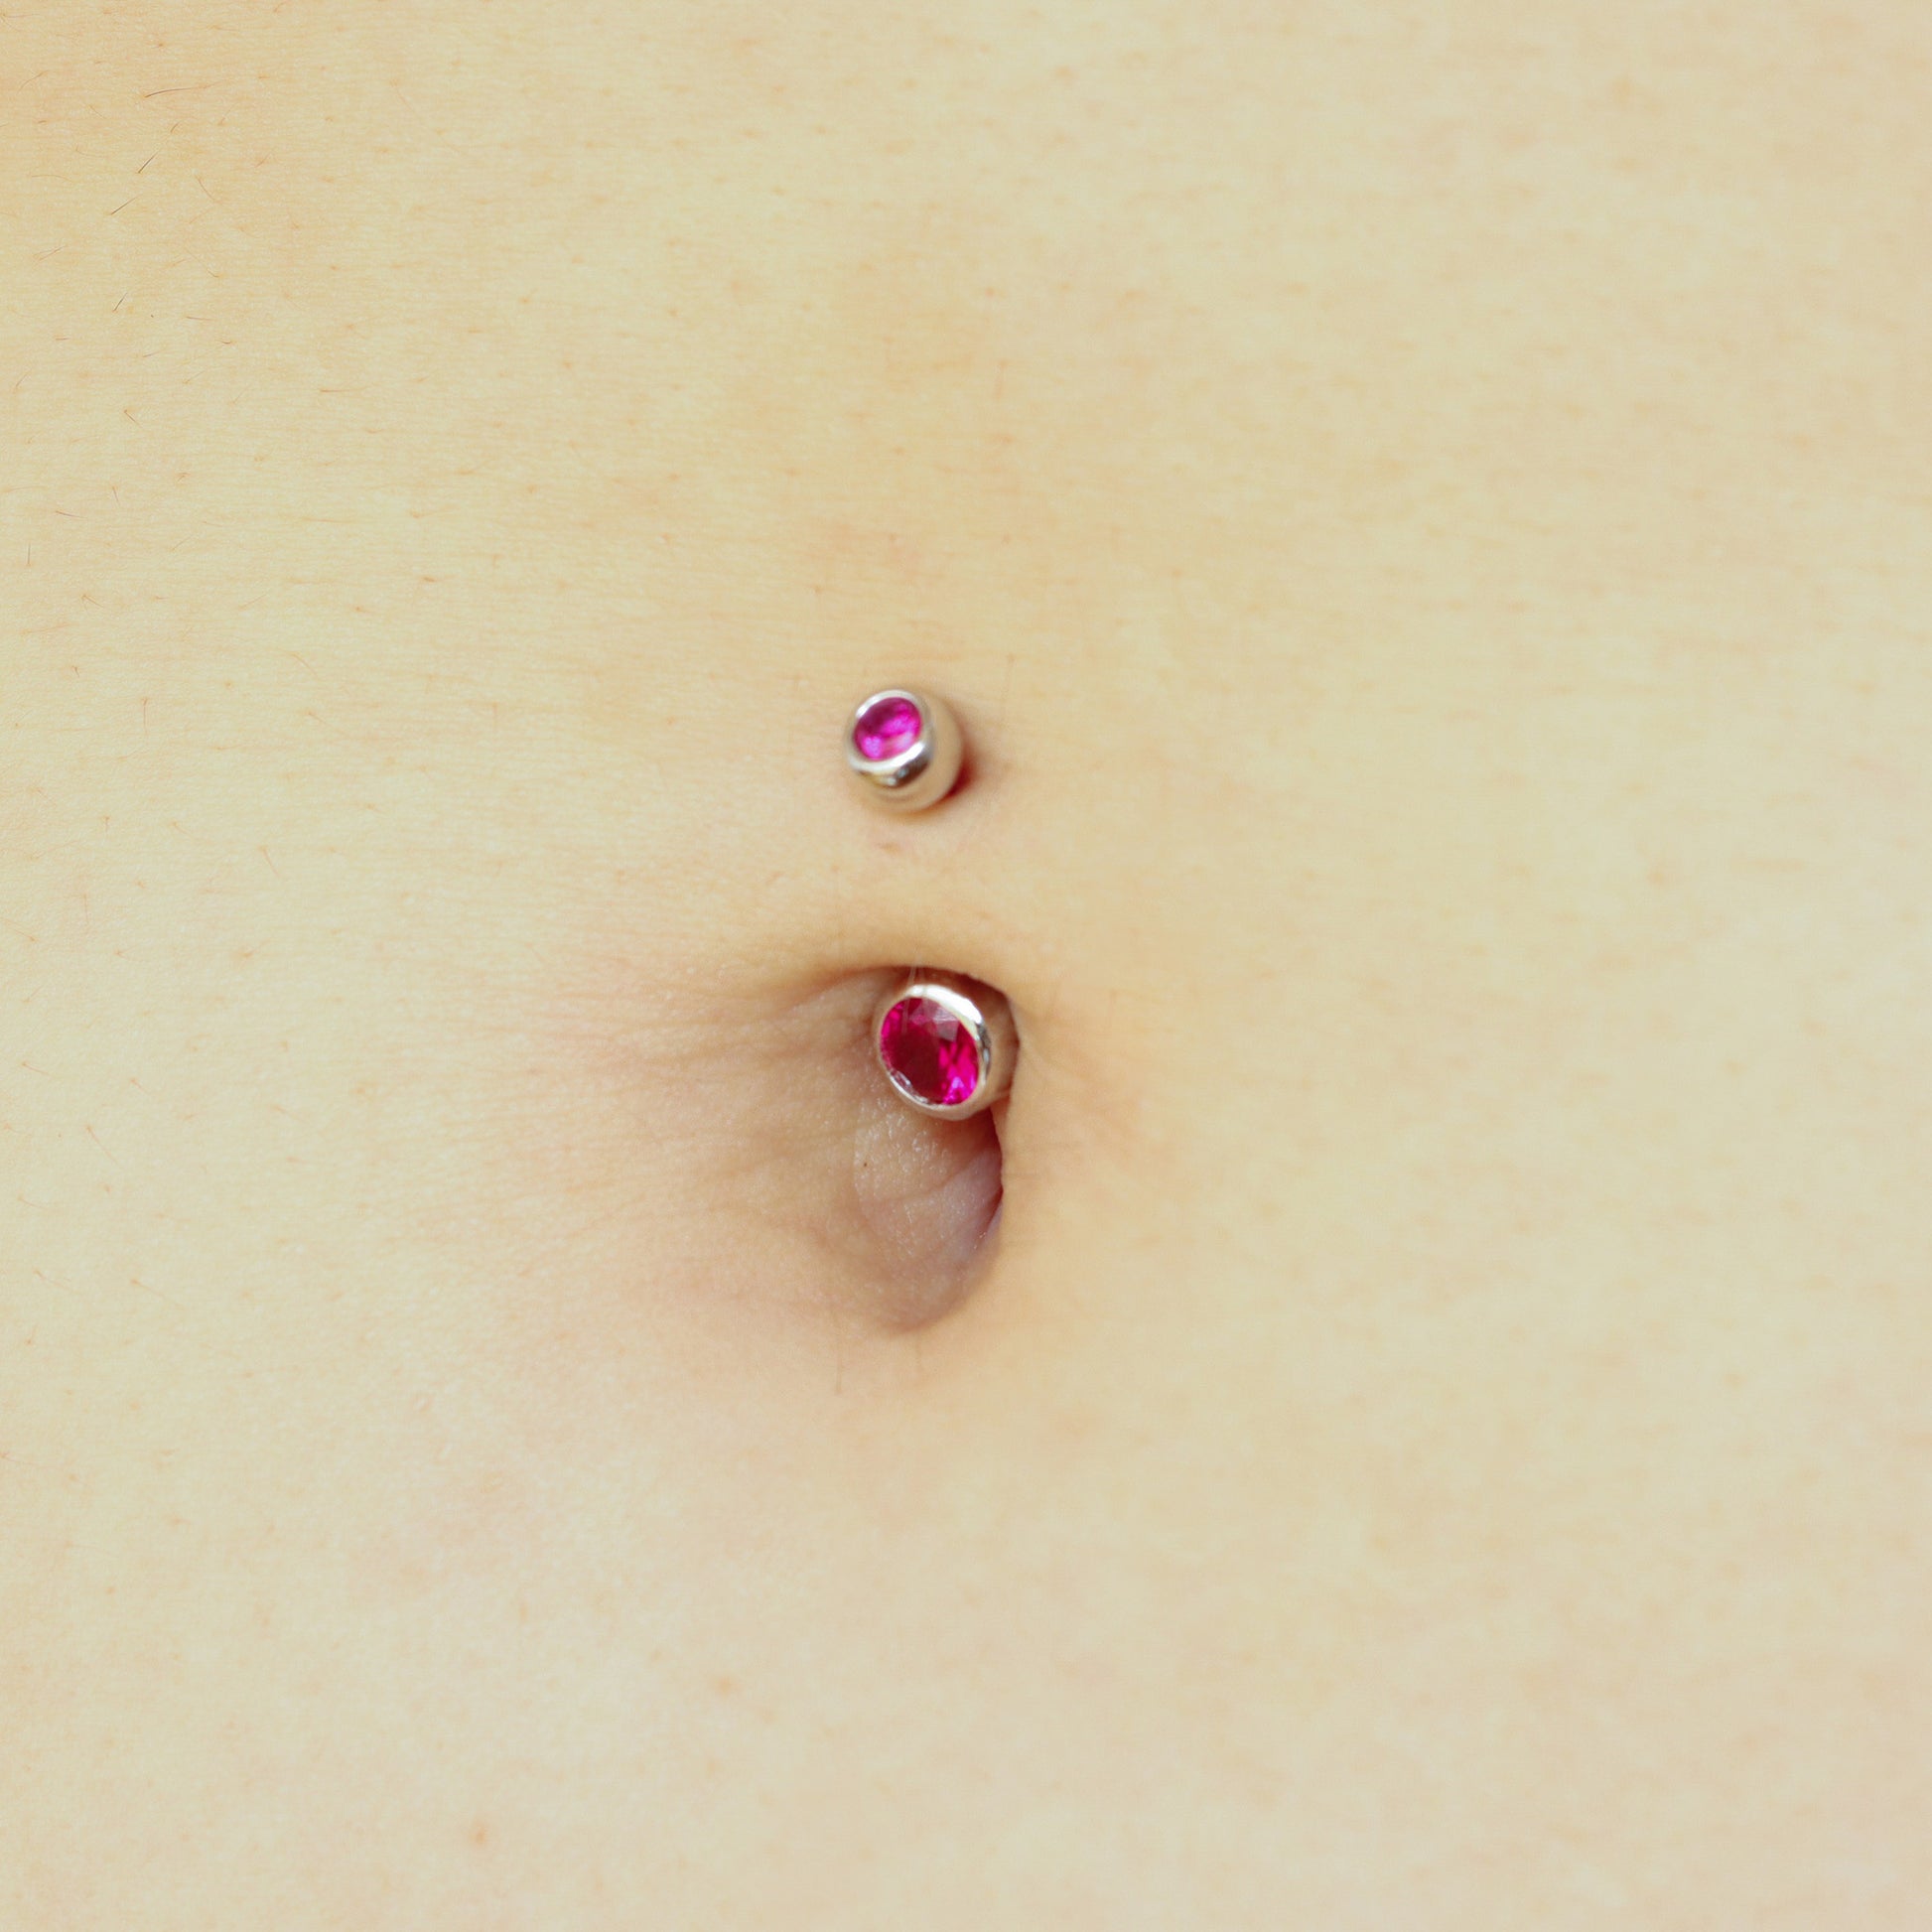 Solid 925 Silver | Small Belly Ring with Berry Pink Cubic Zirconia Crystals | 6mm 1/4" 8mm 5/16" 10mm 3/8" - Sturdy South